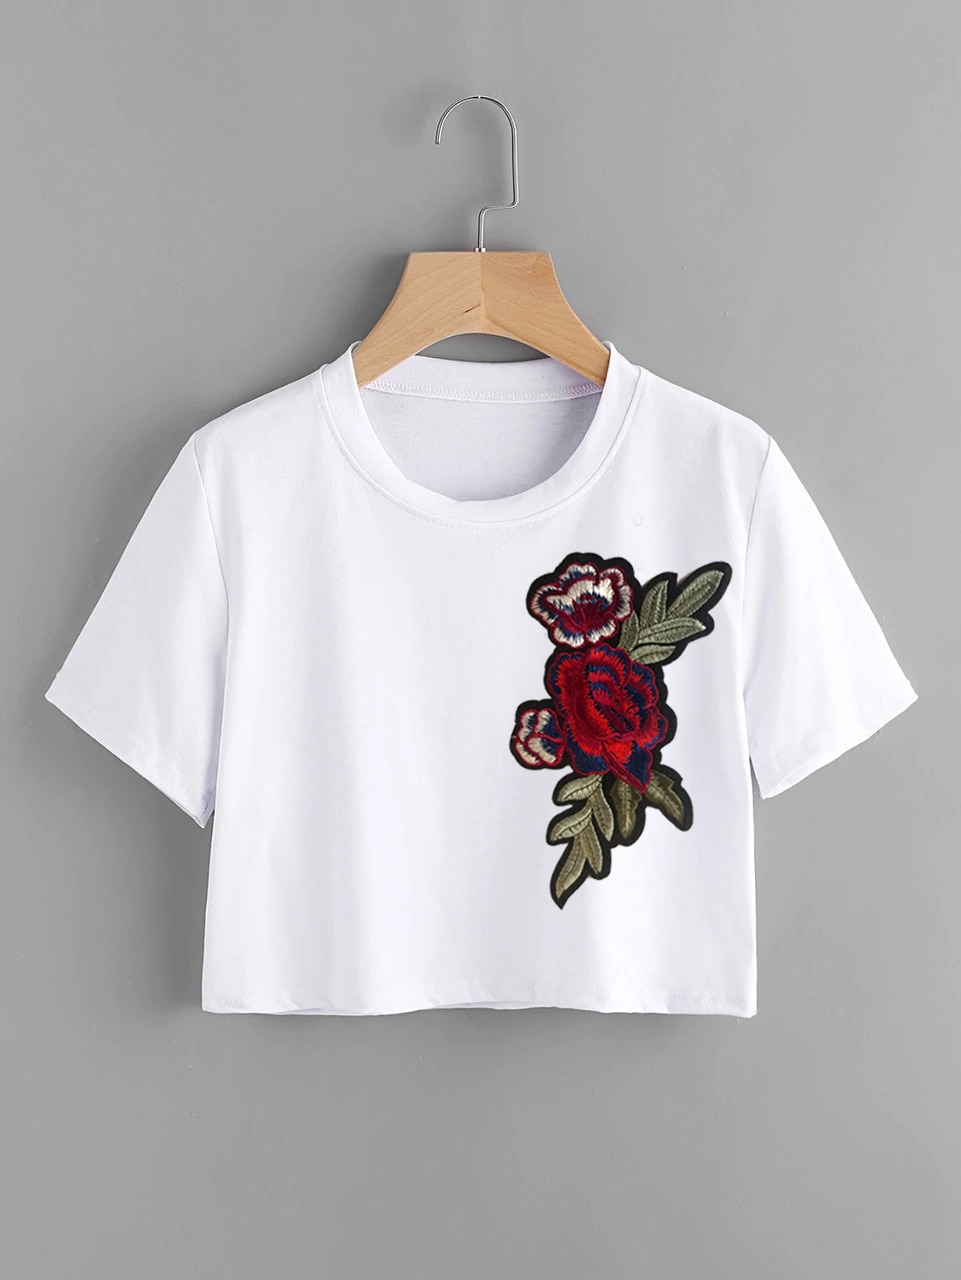 /2019/06/fifth-avenue-womens-ripzt41-embroidered-crop-t-shirt-white-image1.jpeg